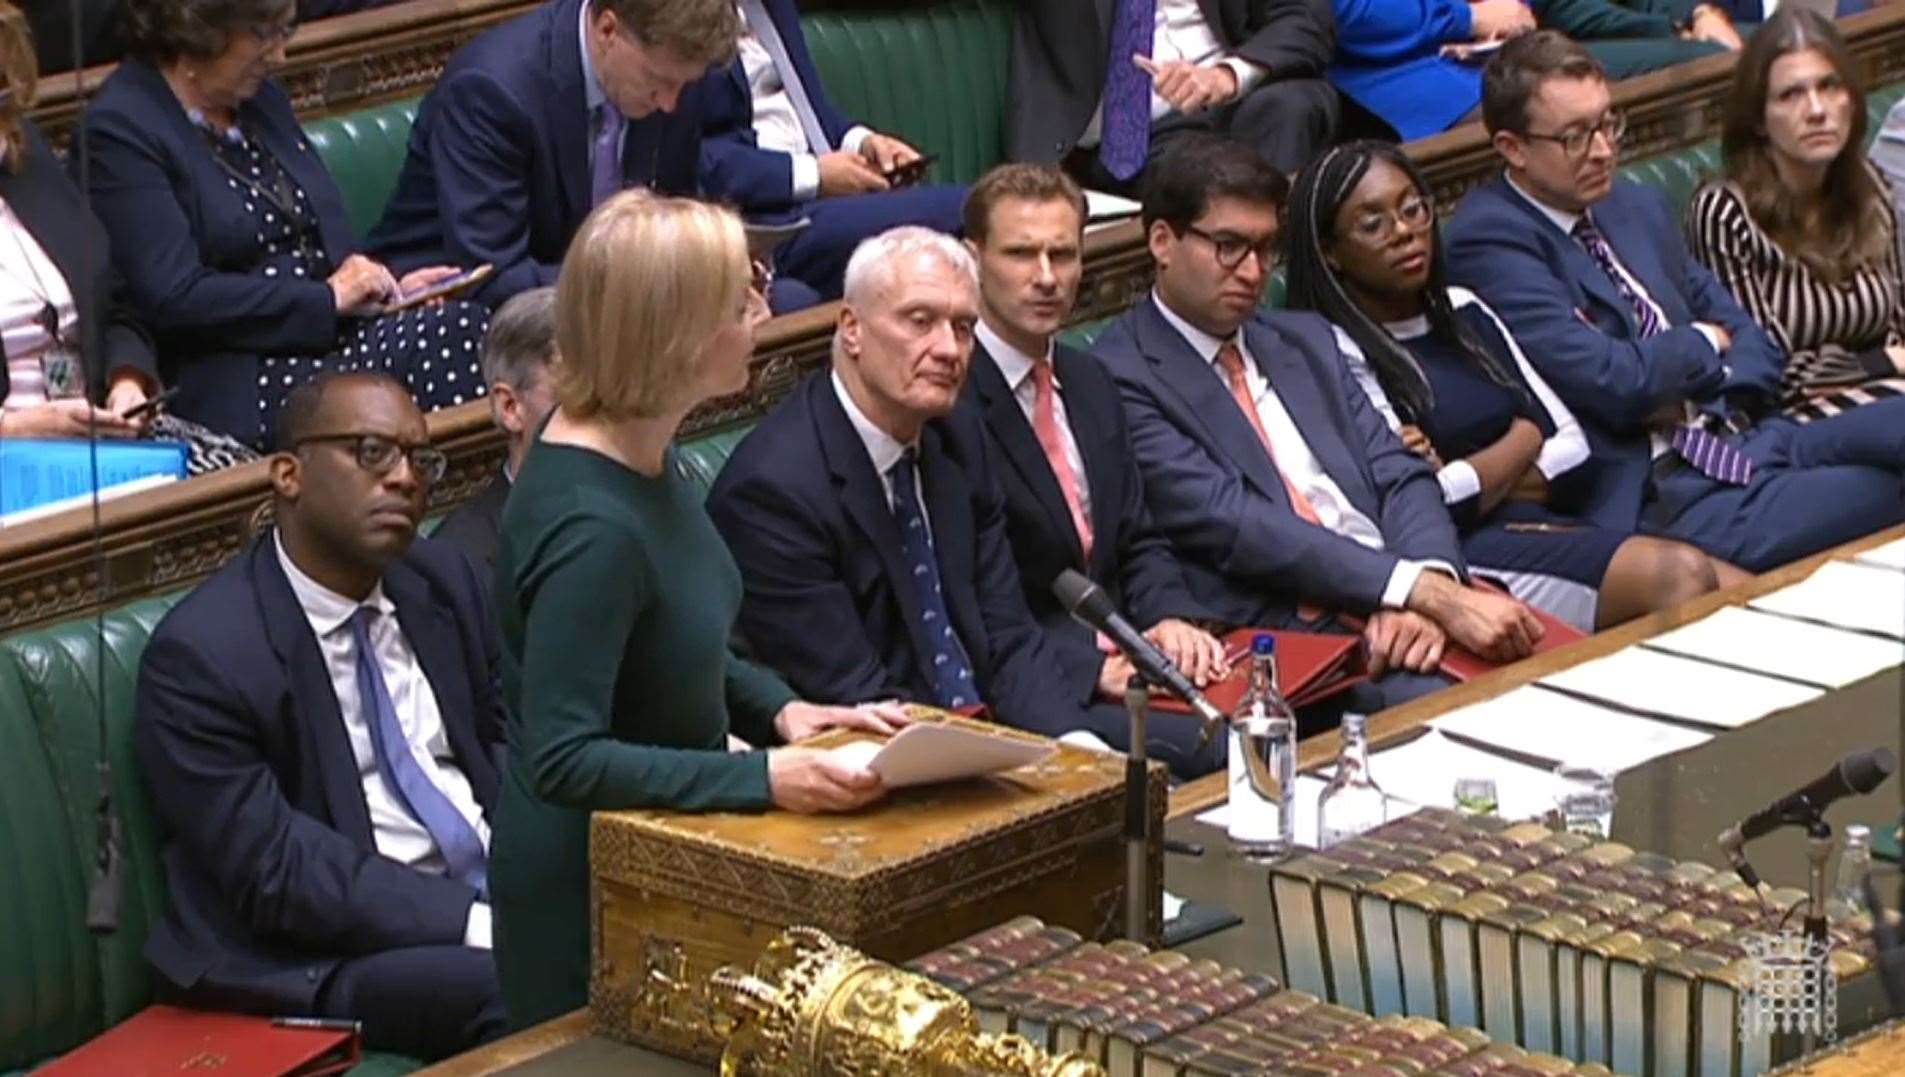 Liz Truss speaking in the House of Commons on energy bills before she was alerted to concerns for the Queen’s health (House of Commons/PA)